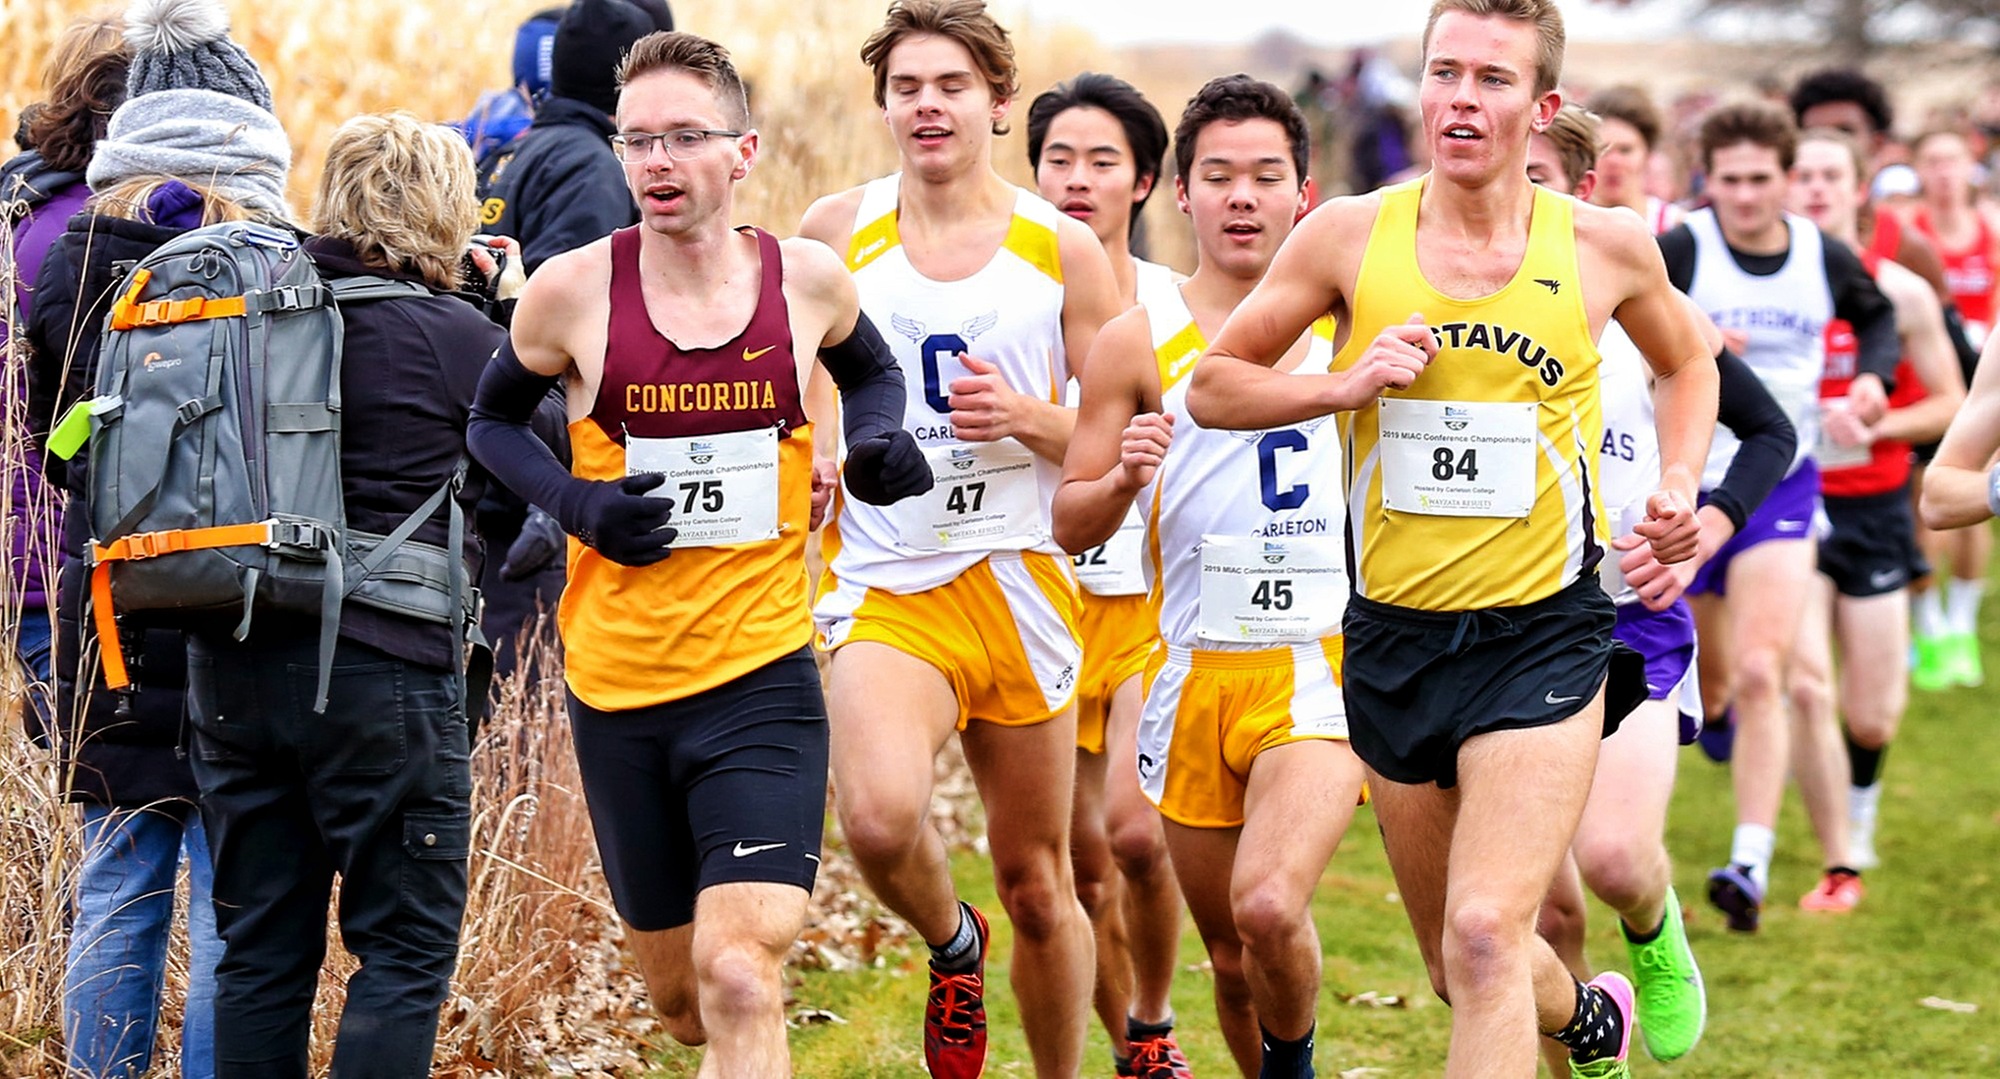 Senior Eric Wicklund led the Cobbers in the NCAA Regional Meet at Wartburg College as CC posted its first Top 15 finish since 2003. (Photo courtesy Nathan Lodermeier)